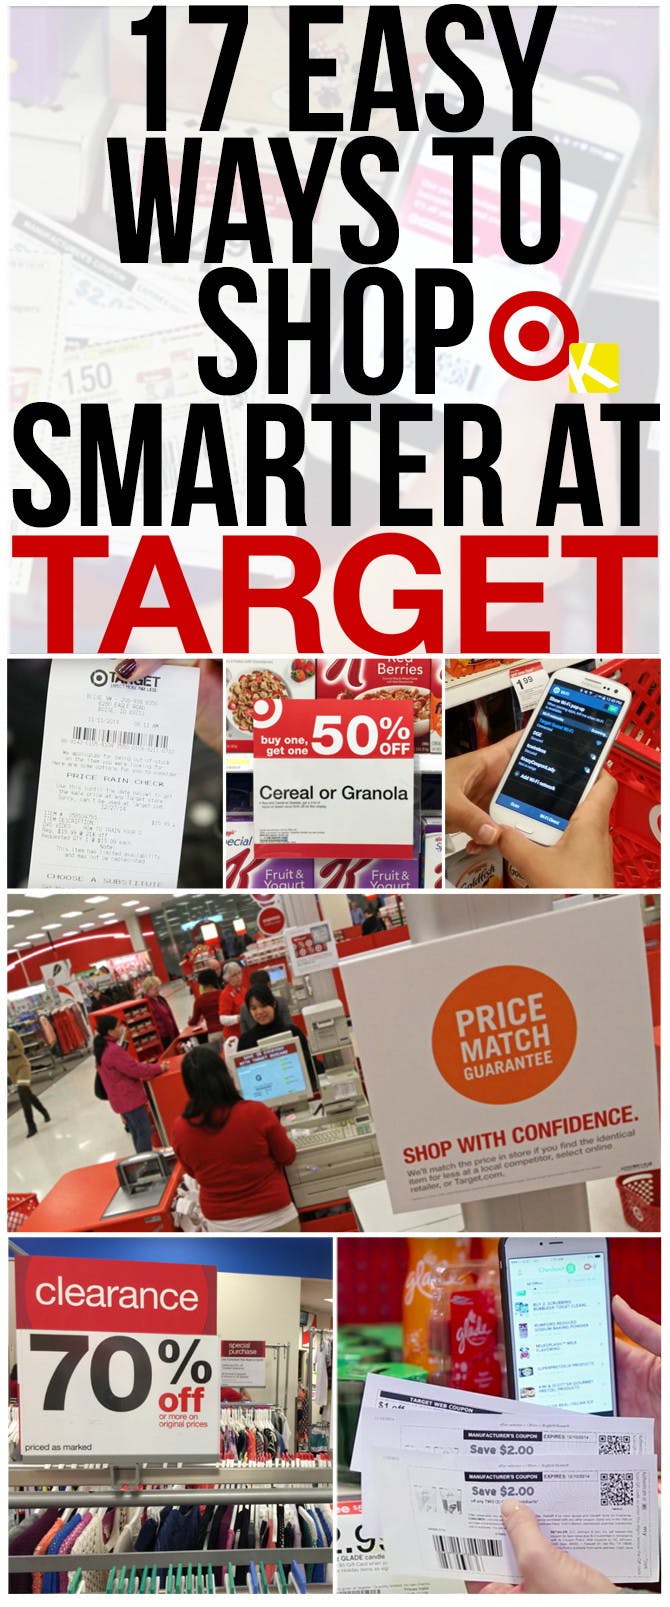 17 Easy Ways to Shop Smarter at Target